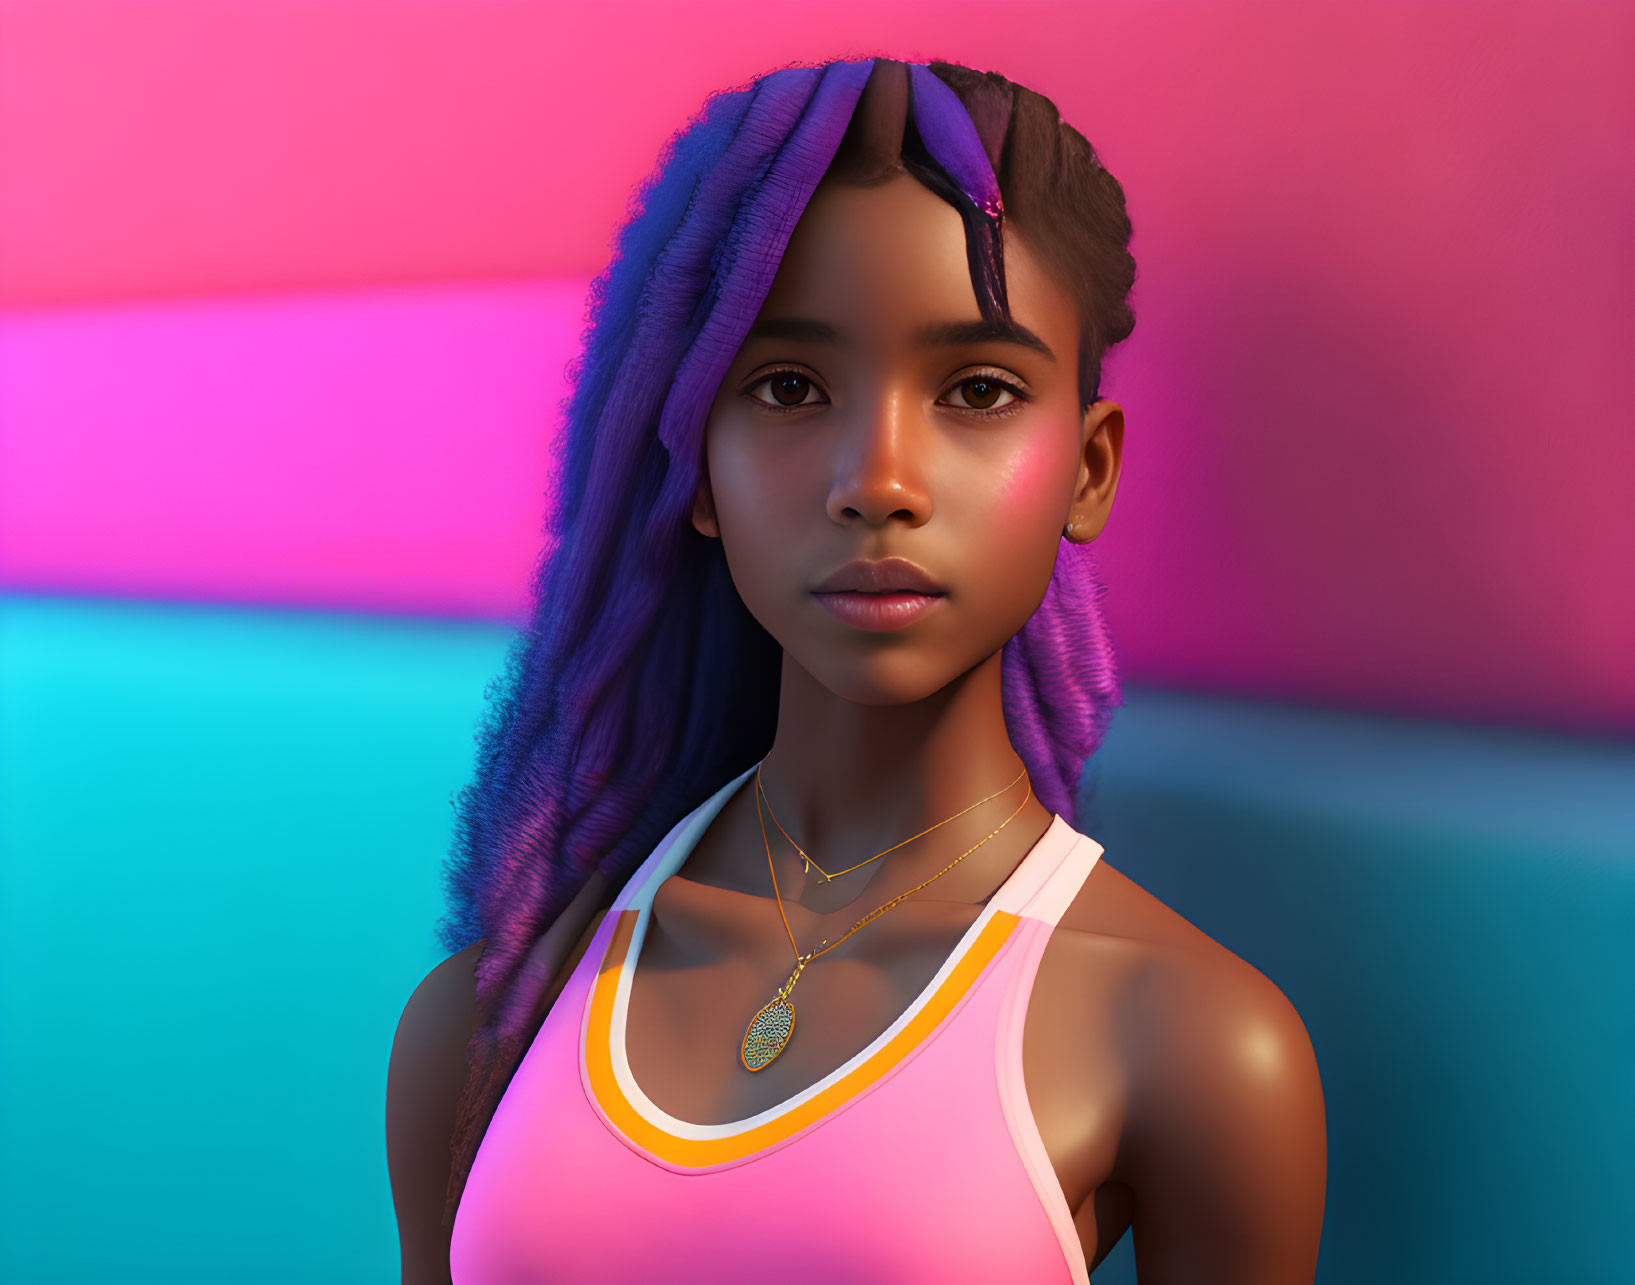 Colorful digital illustration: Young girl with purple braided hair in white tank top with yellow and pink